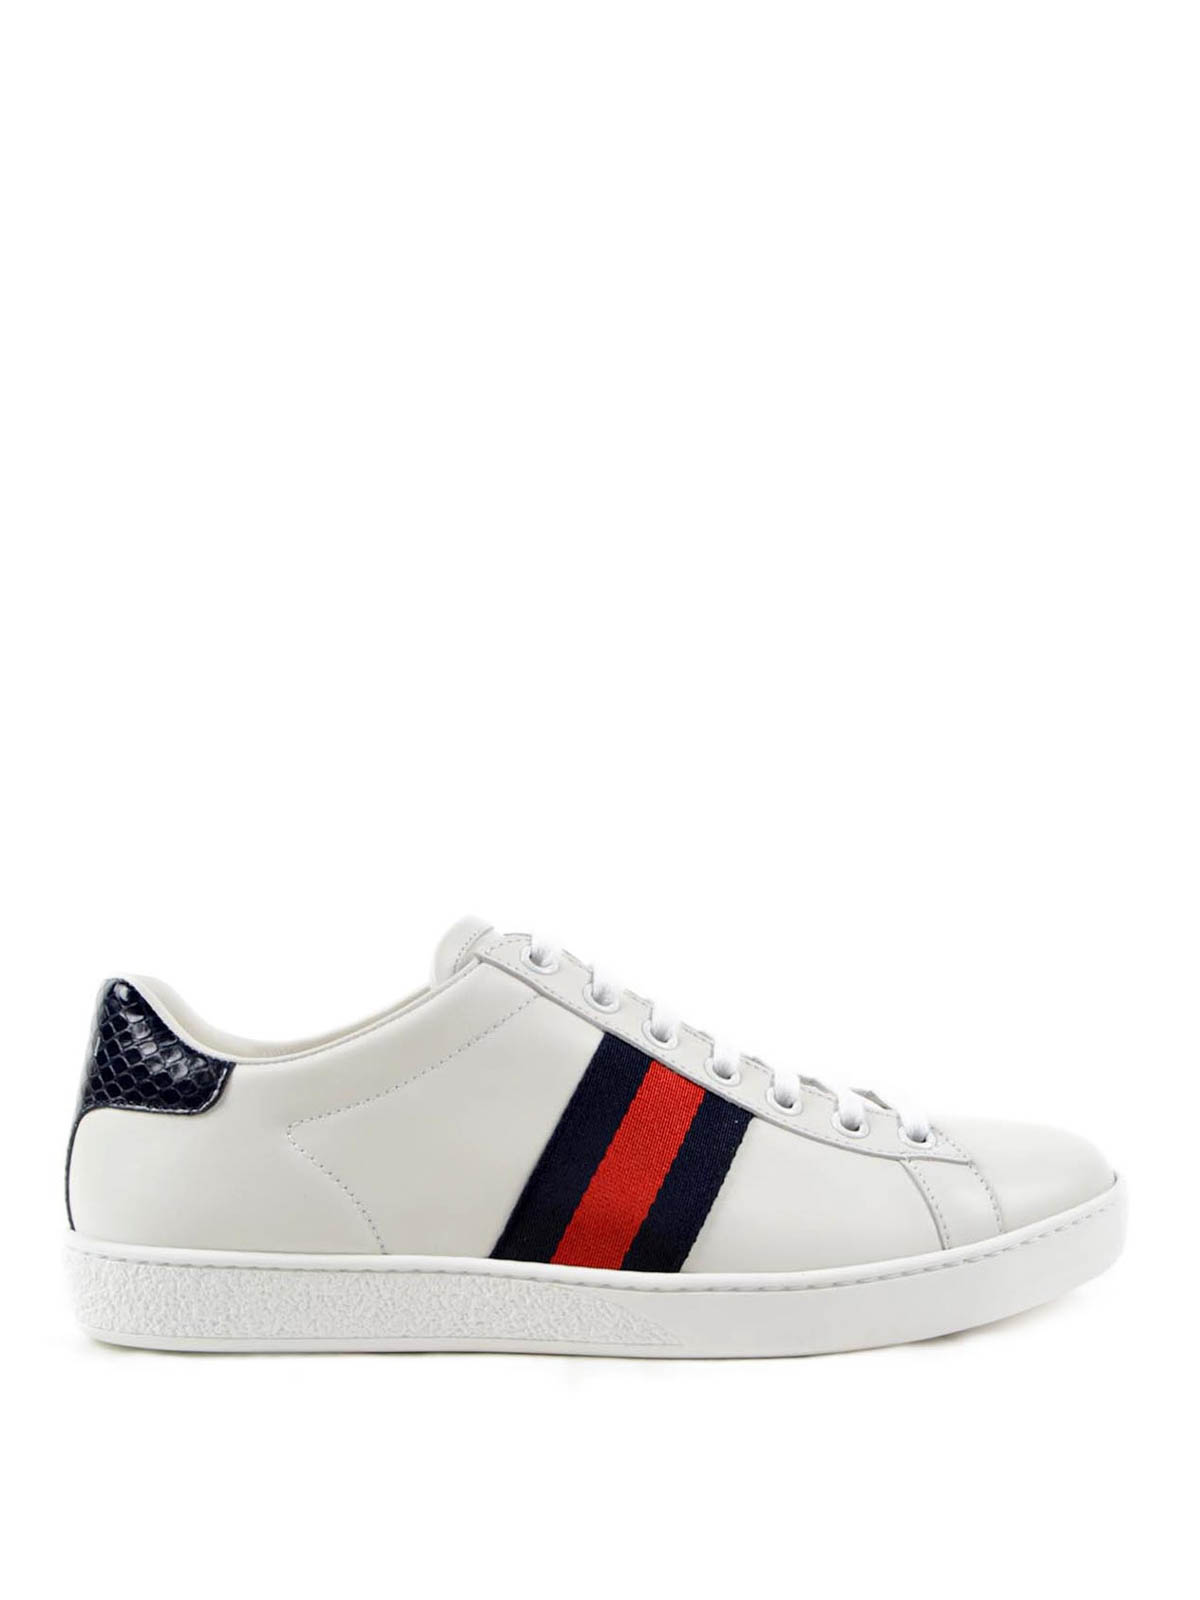 Gucci - Ace leather sneakers - trainers - 387993 A38D0 9072 | iKRIX.com